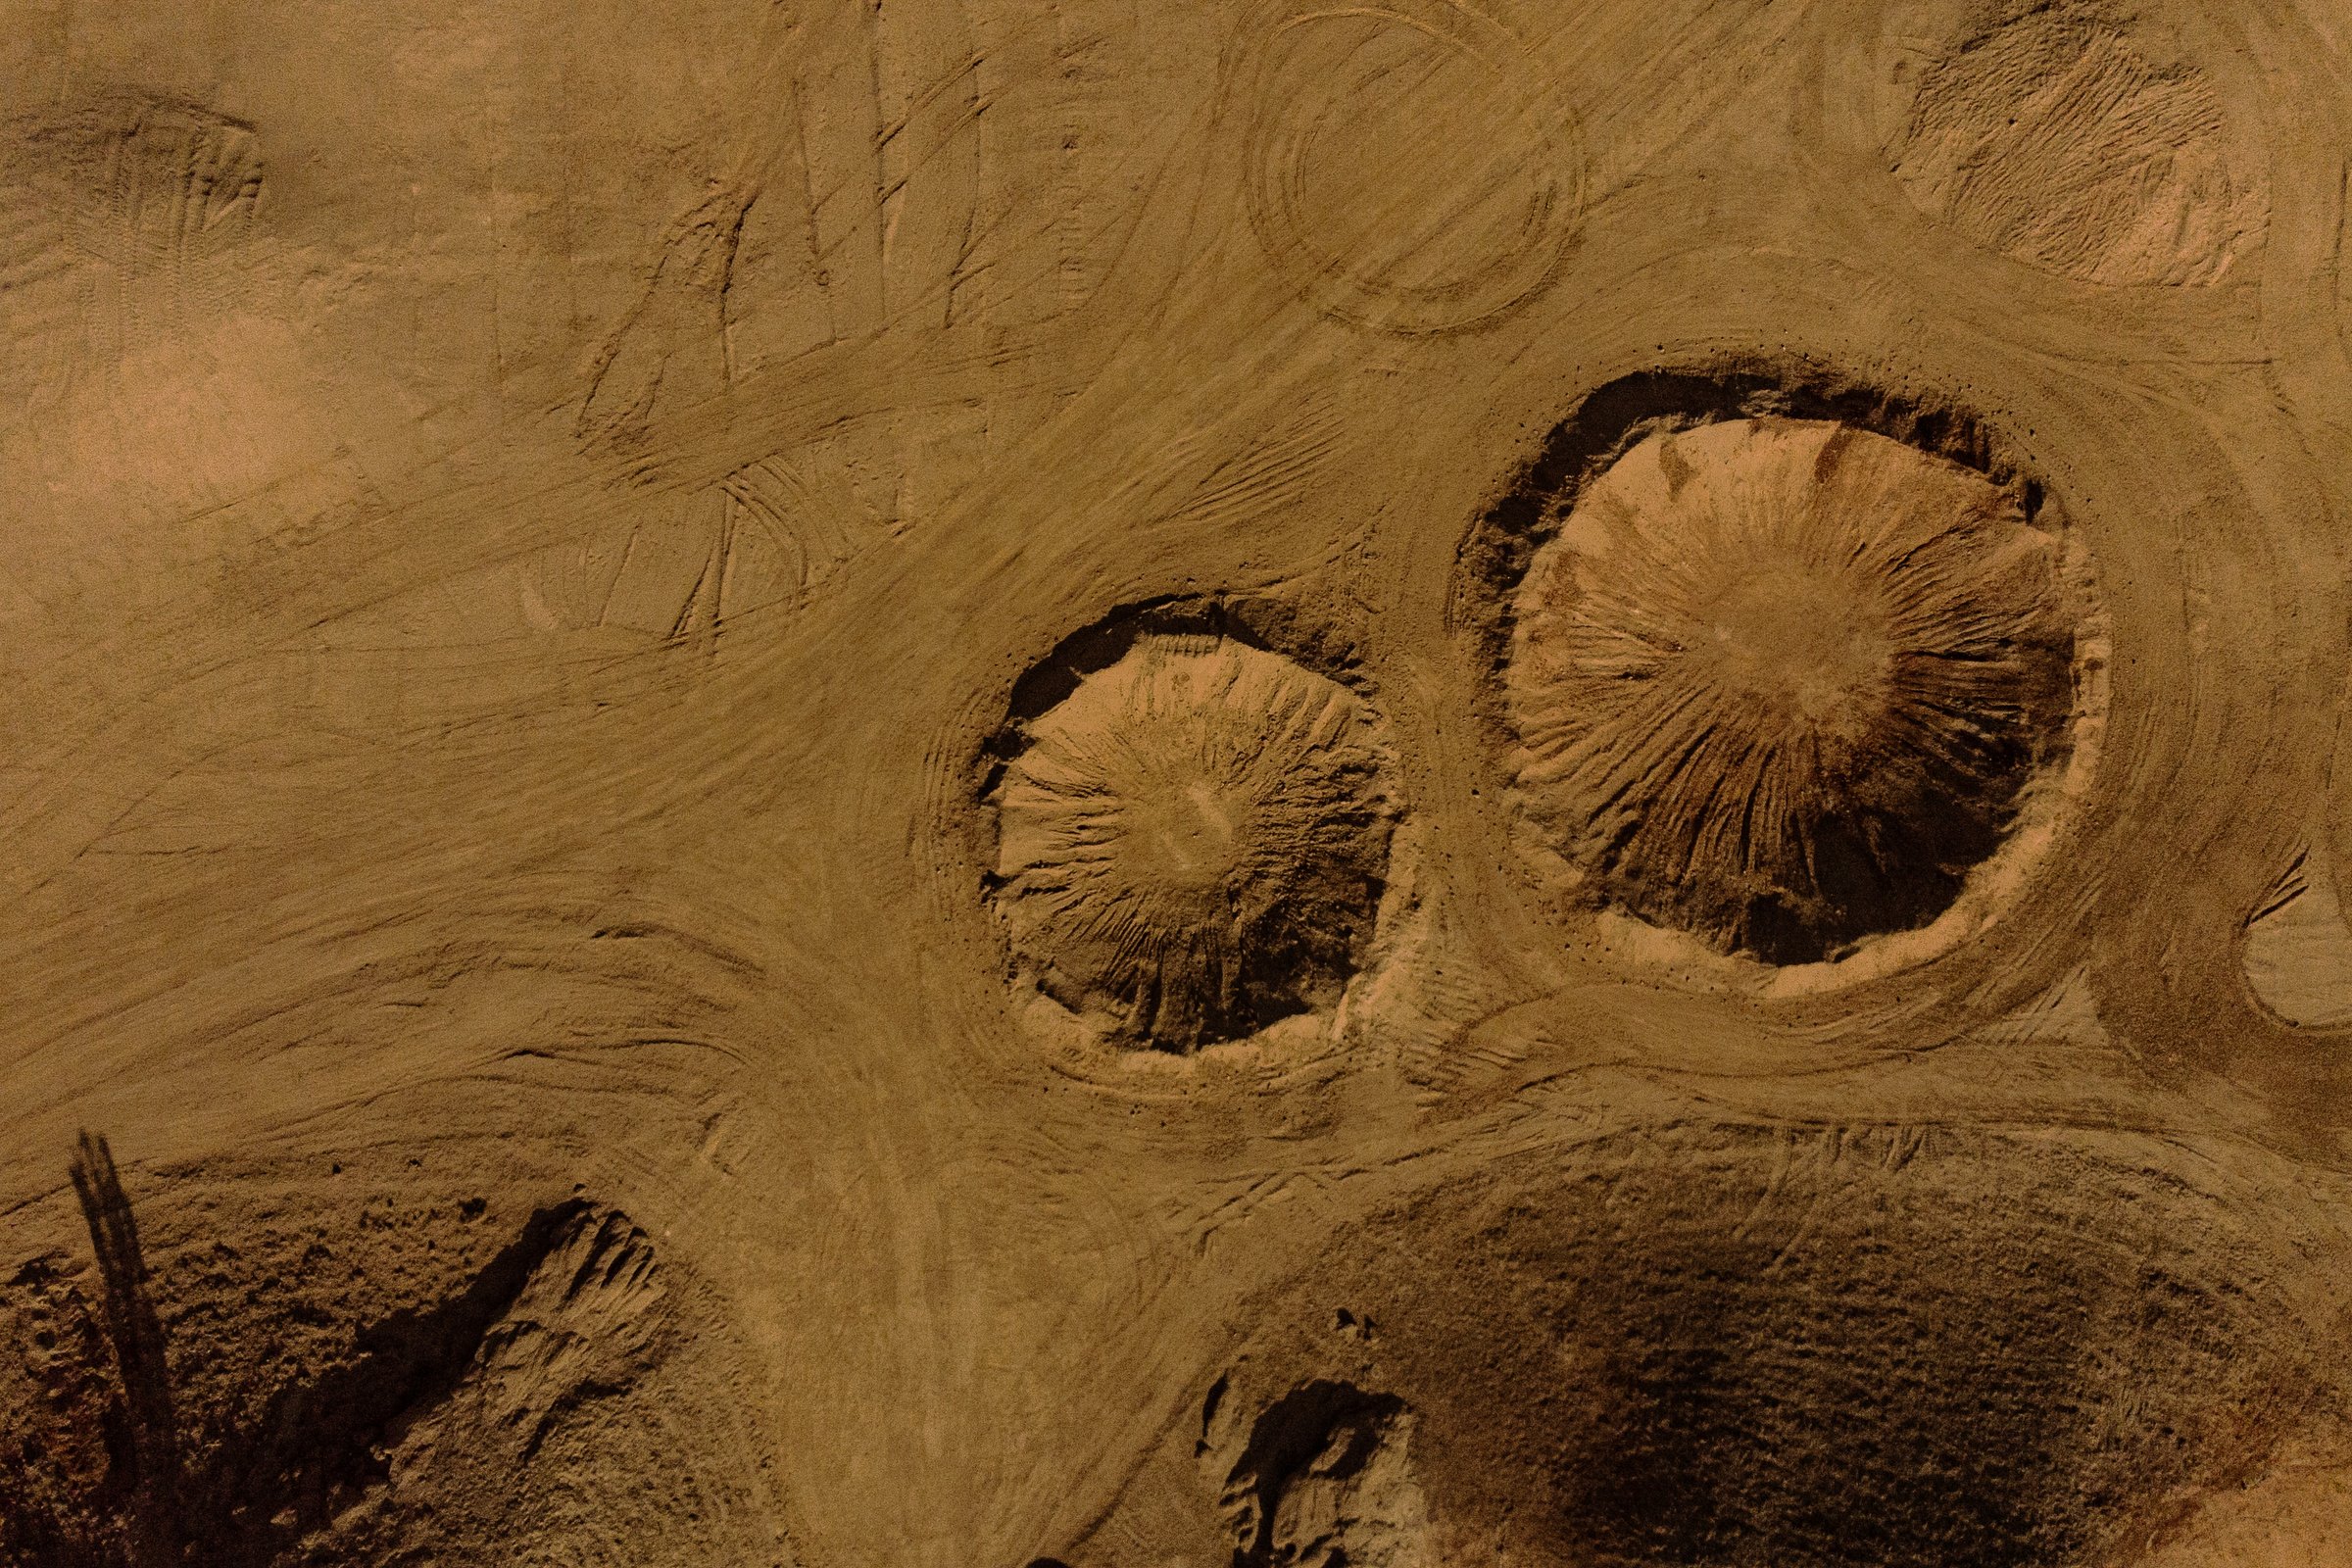  An aerial view of the man made craters next to the C Space in Gobi desert, some 40 km from Jinchang in China's northwest Gansu province. The craters are right next to the first Mars simulation base in China.  